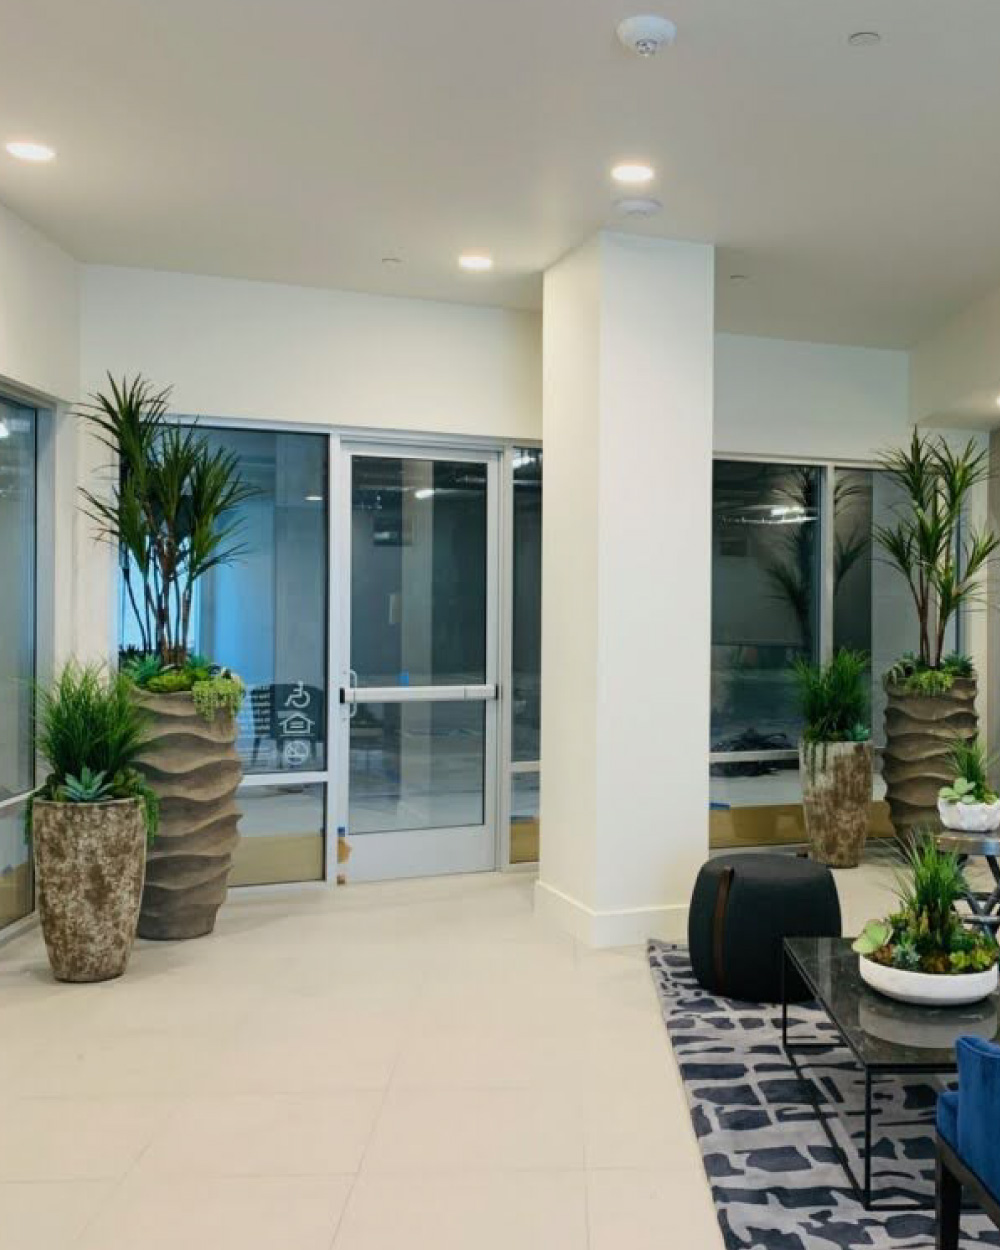 Office interior with plants